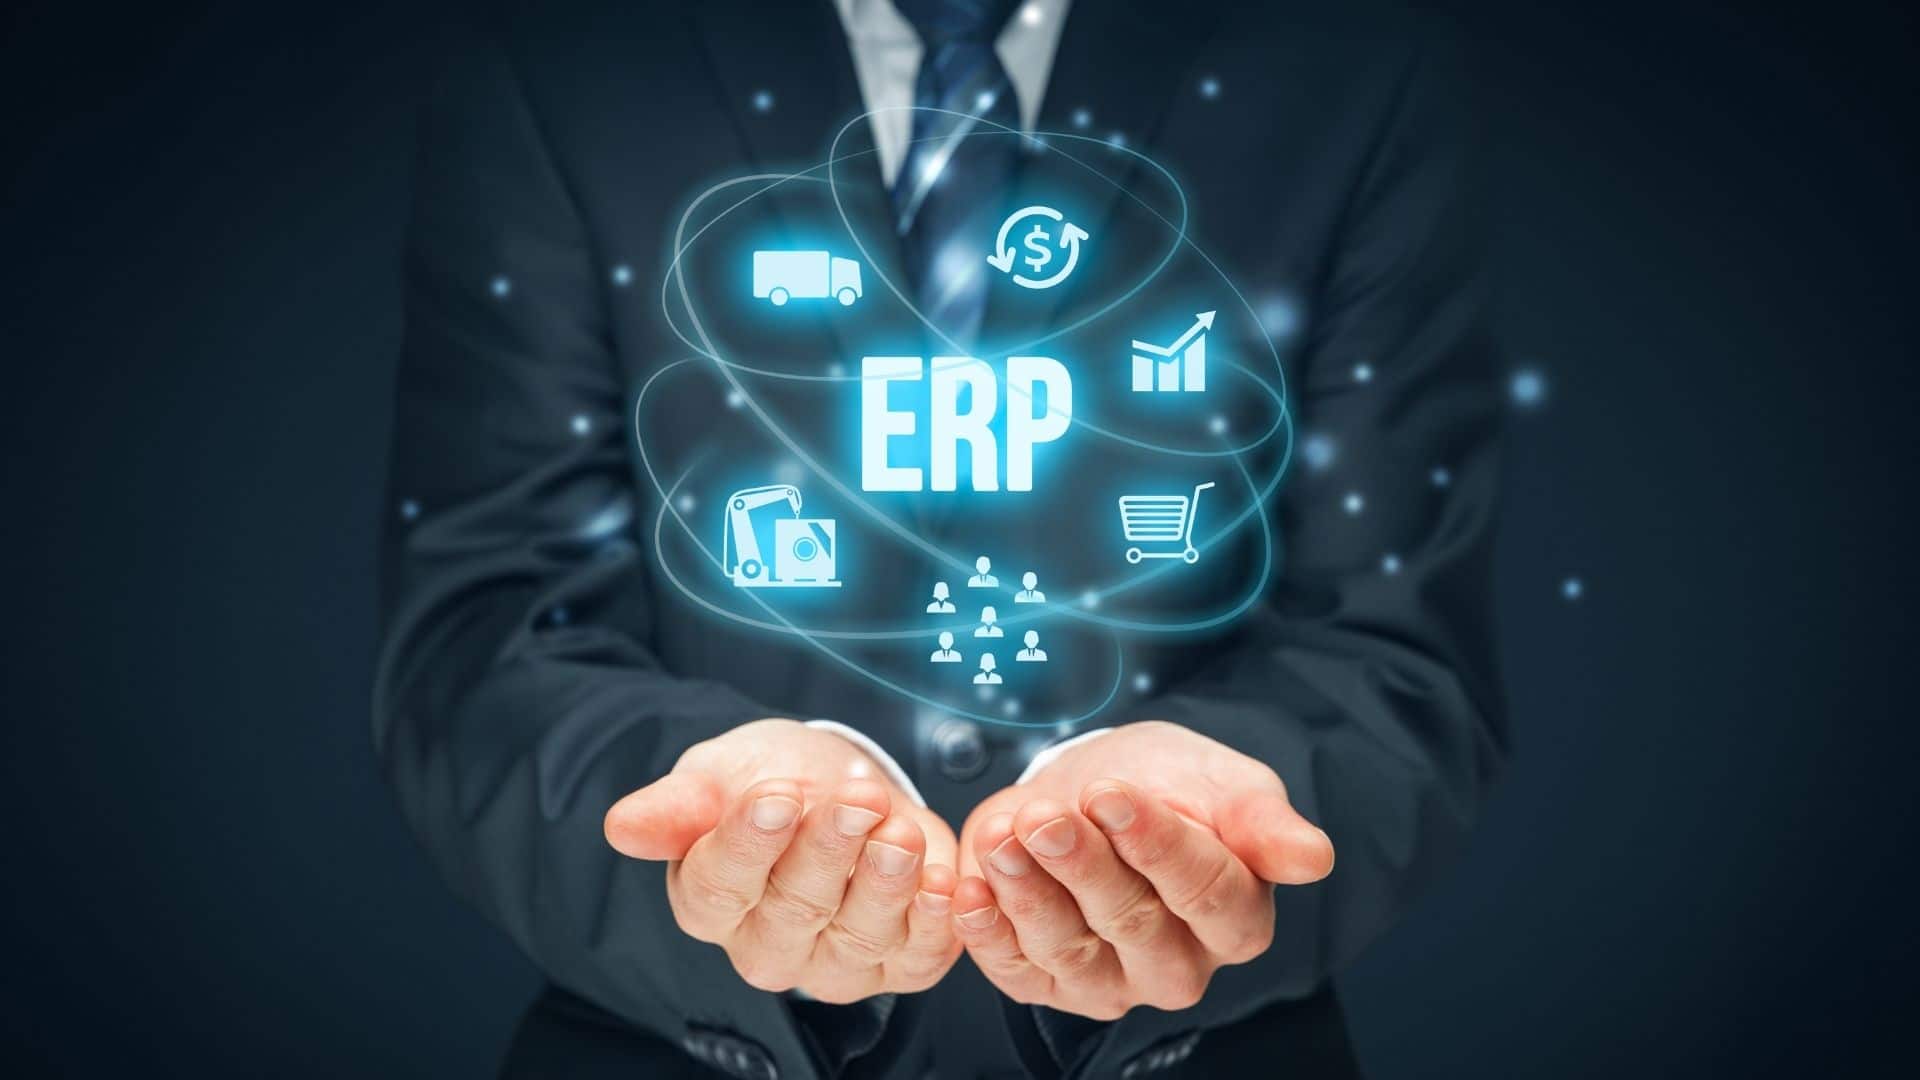 ERP application (https://www.oracle.com/sg/erp/what-is-erp/)